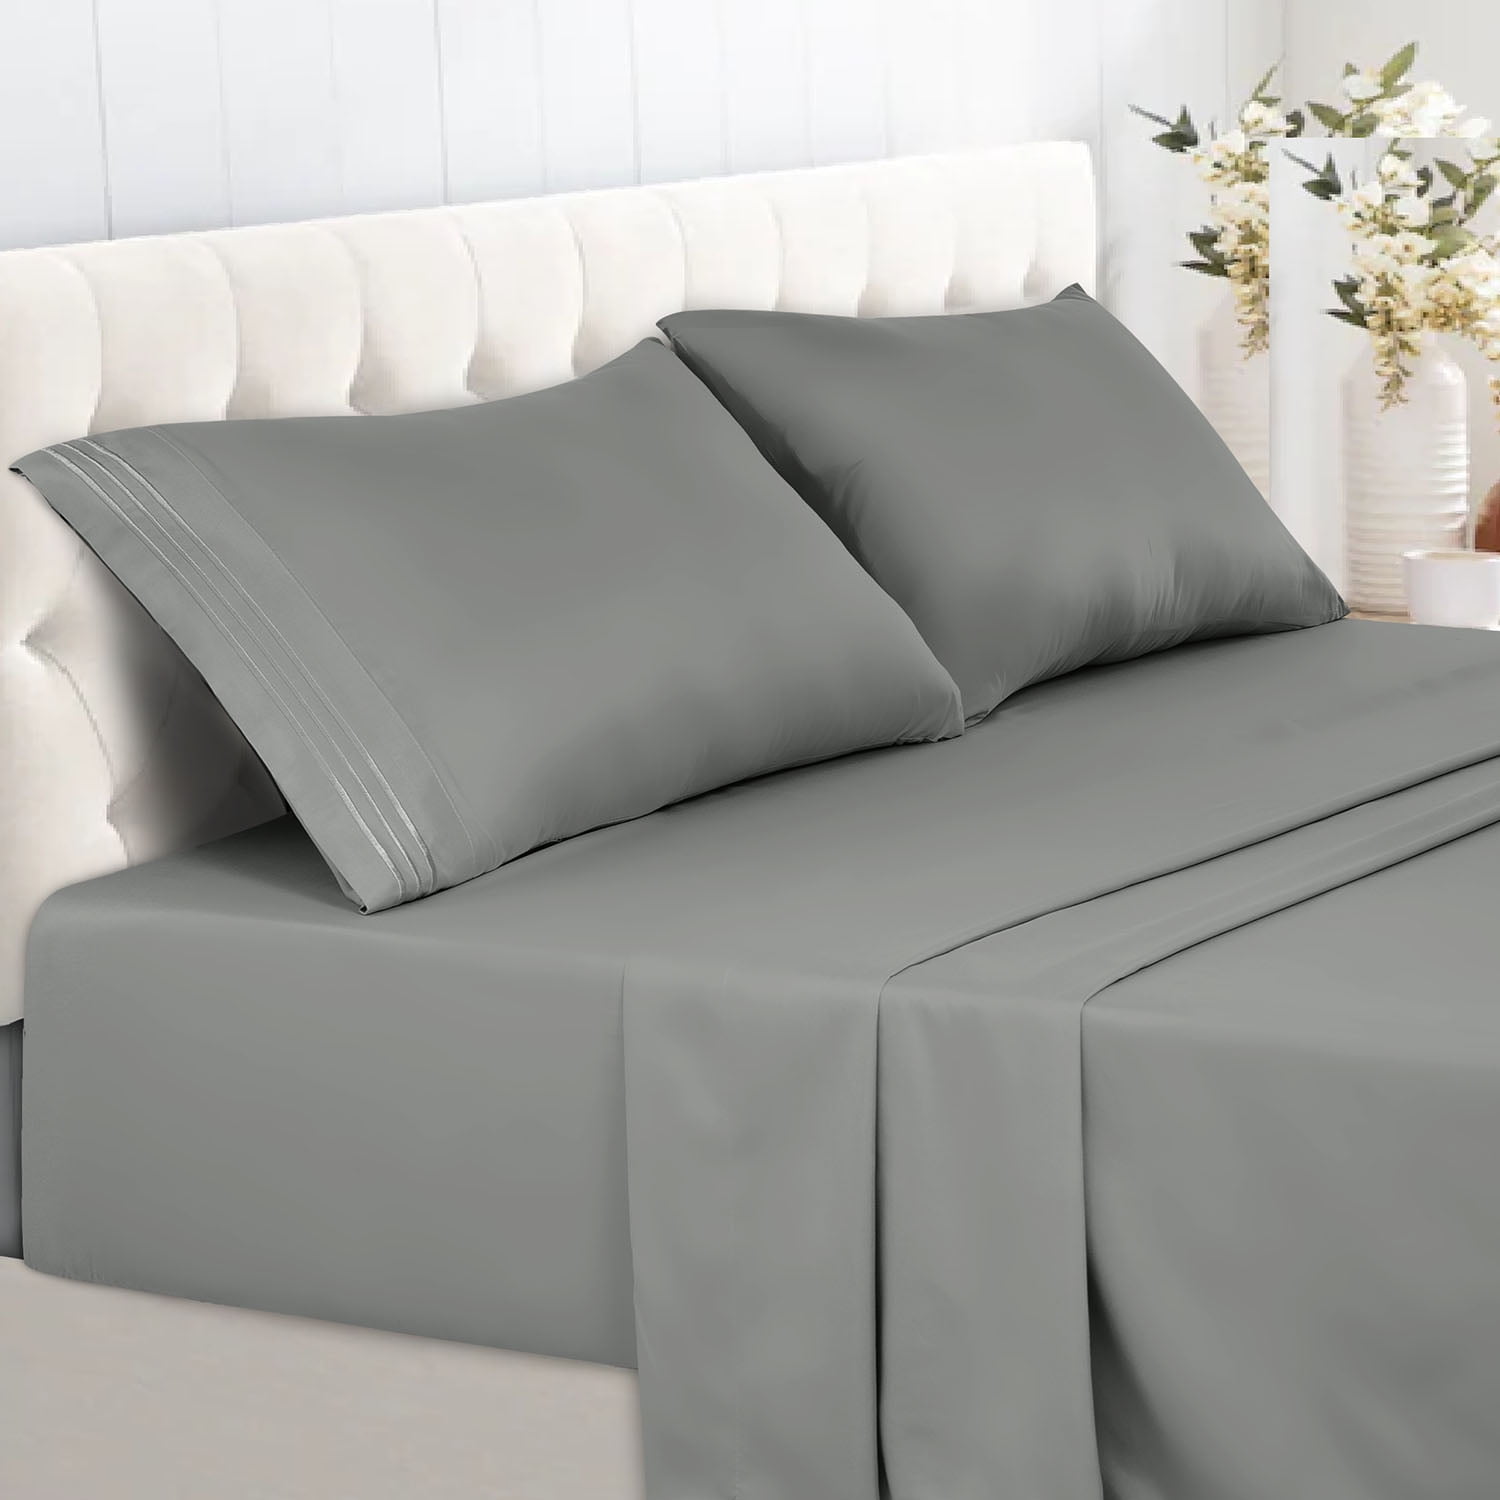 Lux Decor Collection Queen Size Bed Sheets Set, Luxury 4 Piece Microfiber  Deep Pocket Fitted Sheet, Flat Sheet & Pillowcases Bedding Sheets Set -  Gray